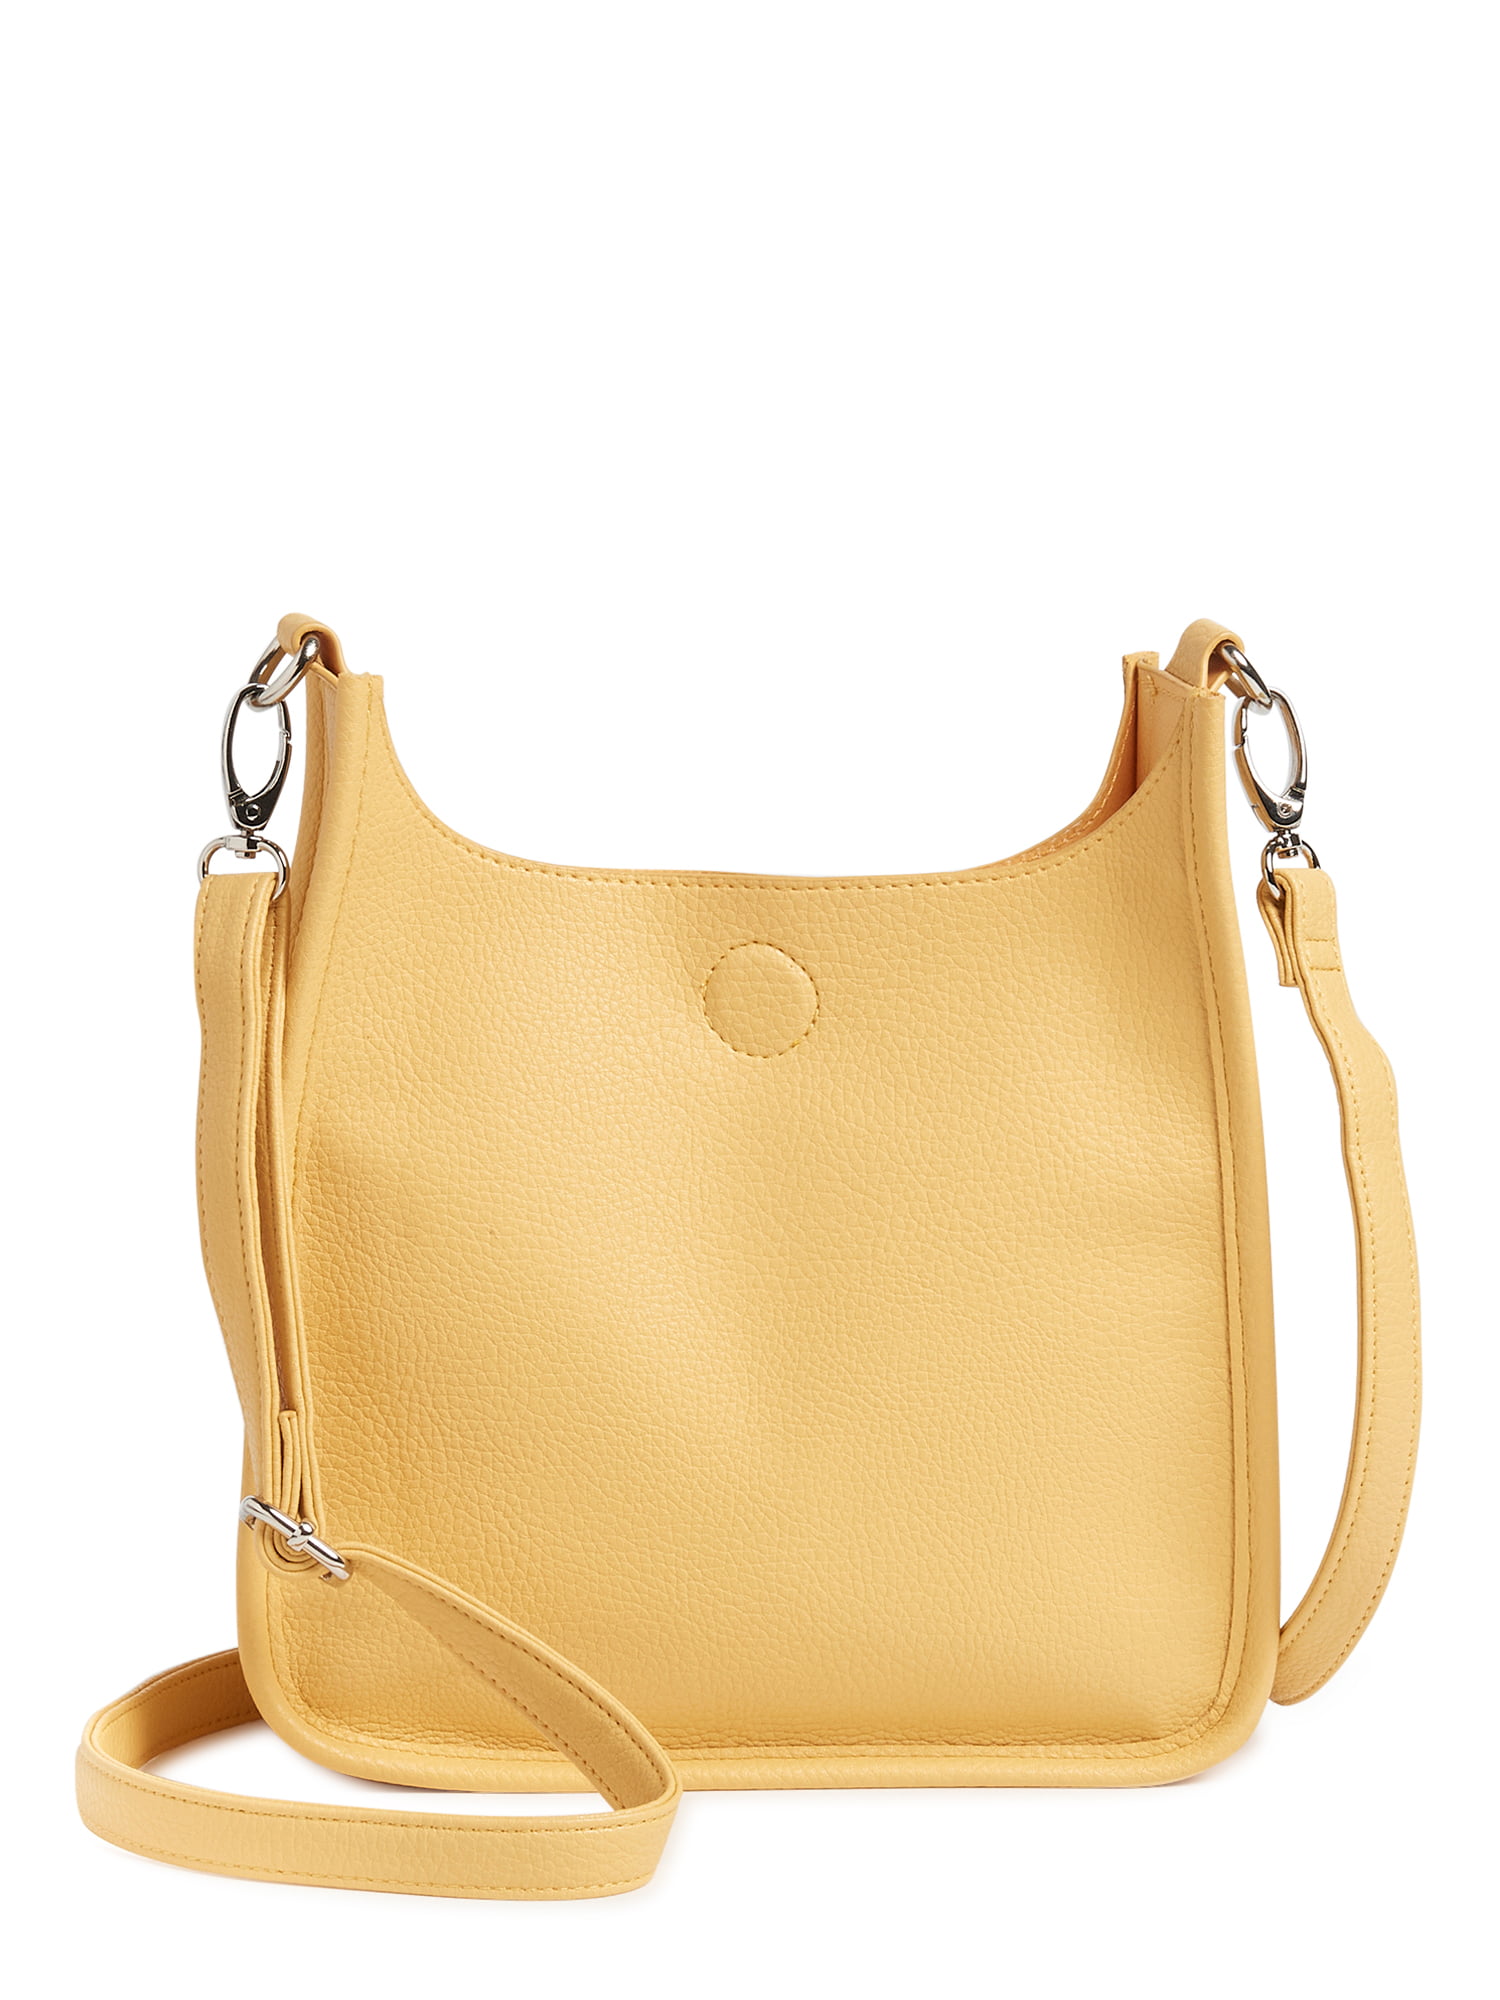 Margot New York - Now introduced in our best selling color, cognac, the  Adelle Versatile can be worn as a crossbody, handbag, shoulder bag or a  clutch. Two detachable straps ensure that